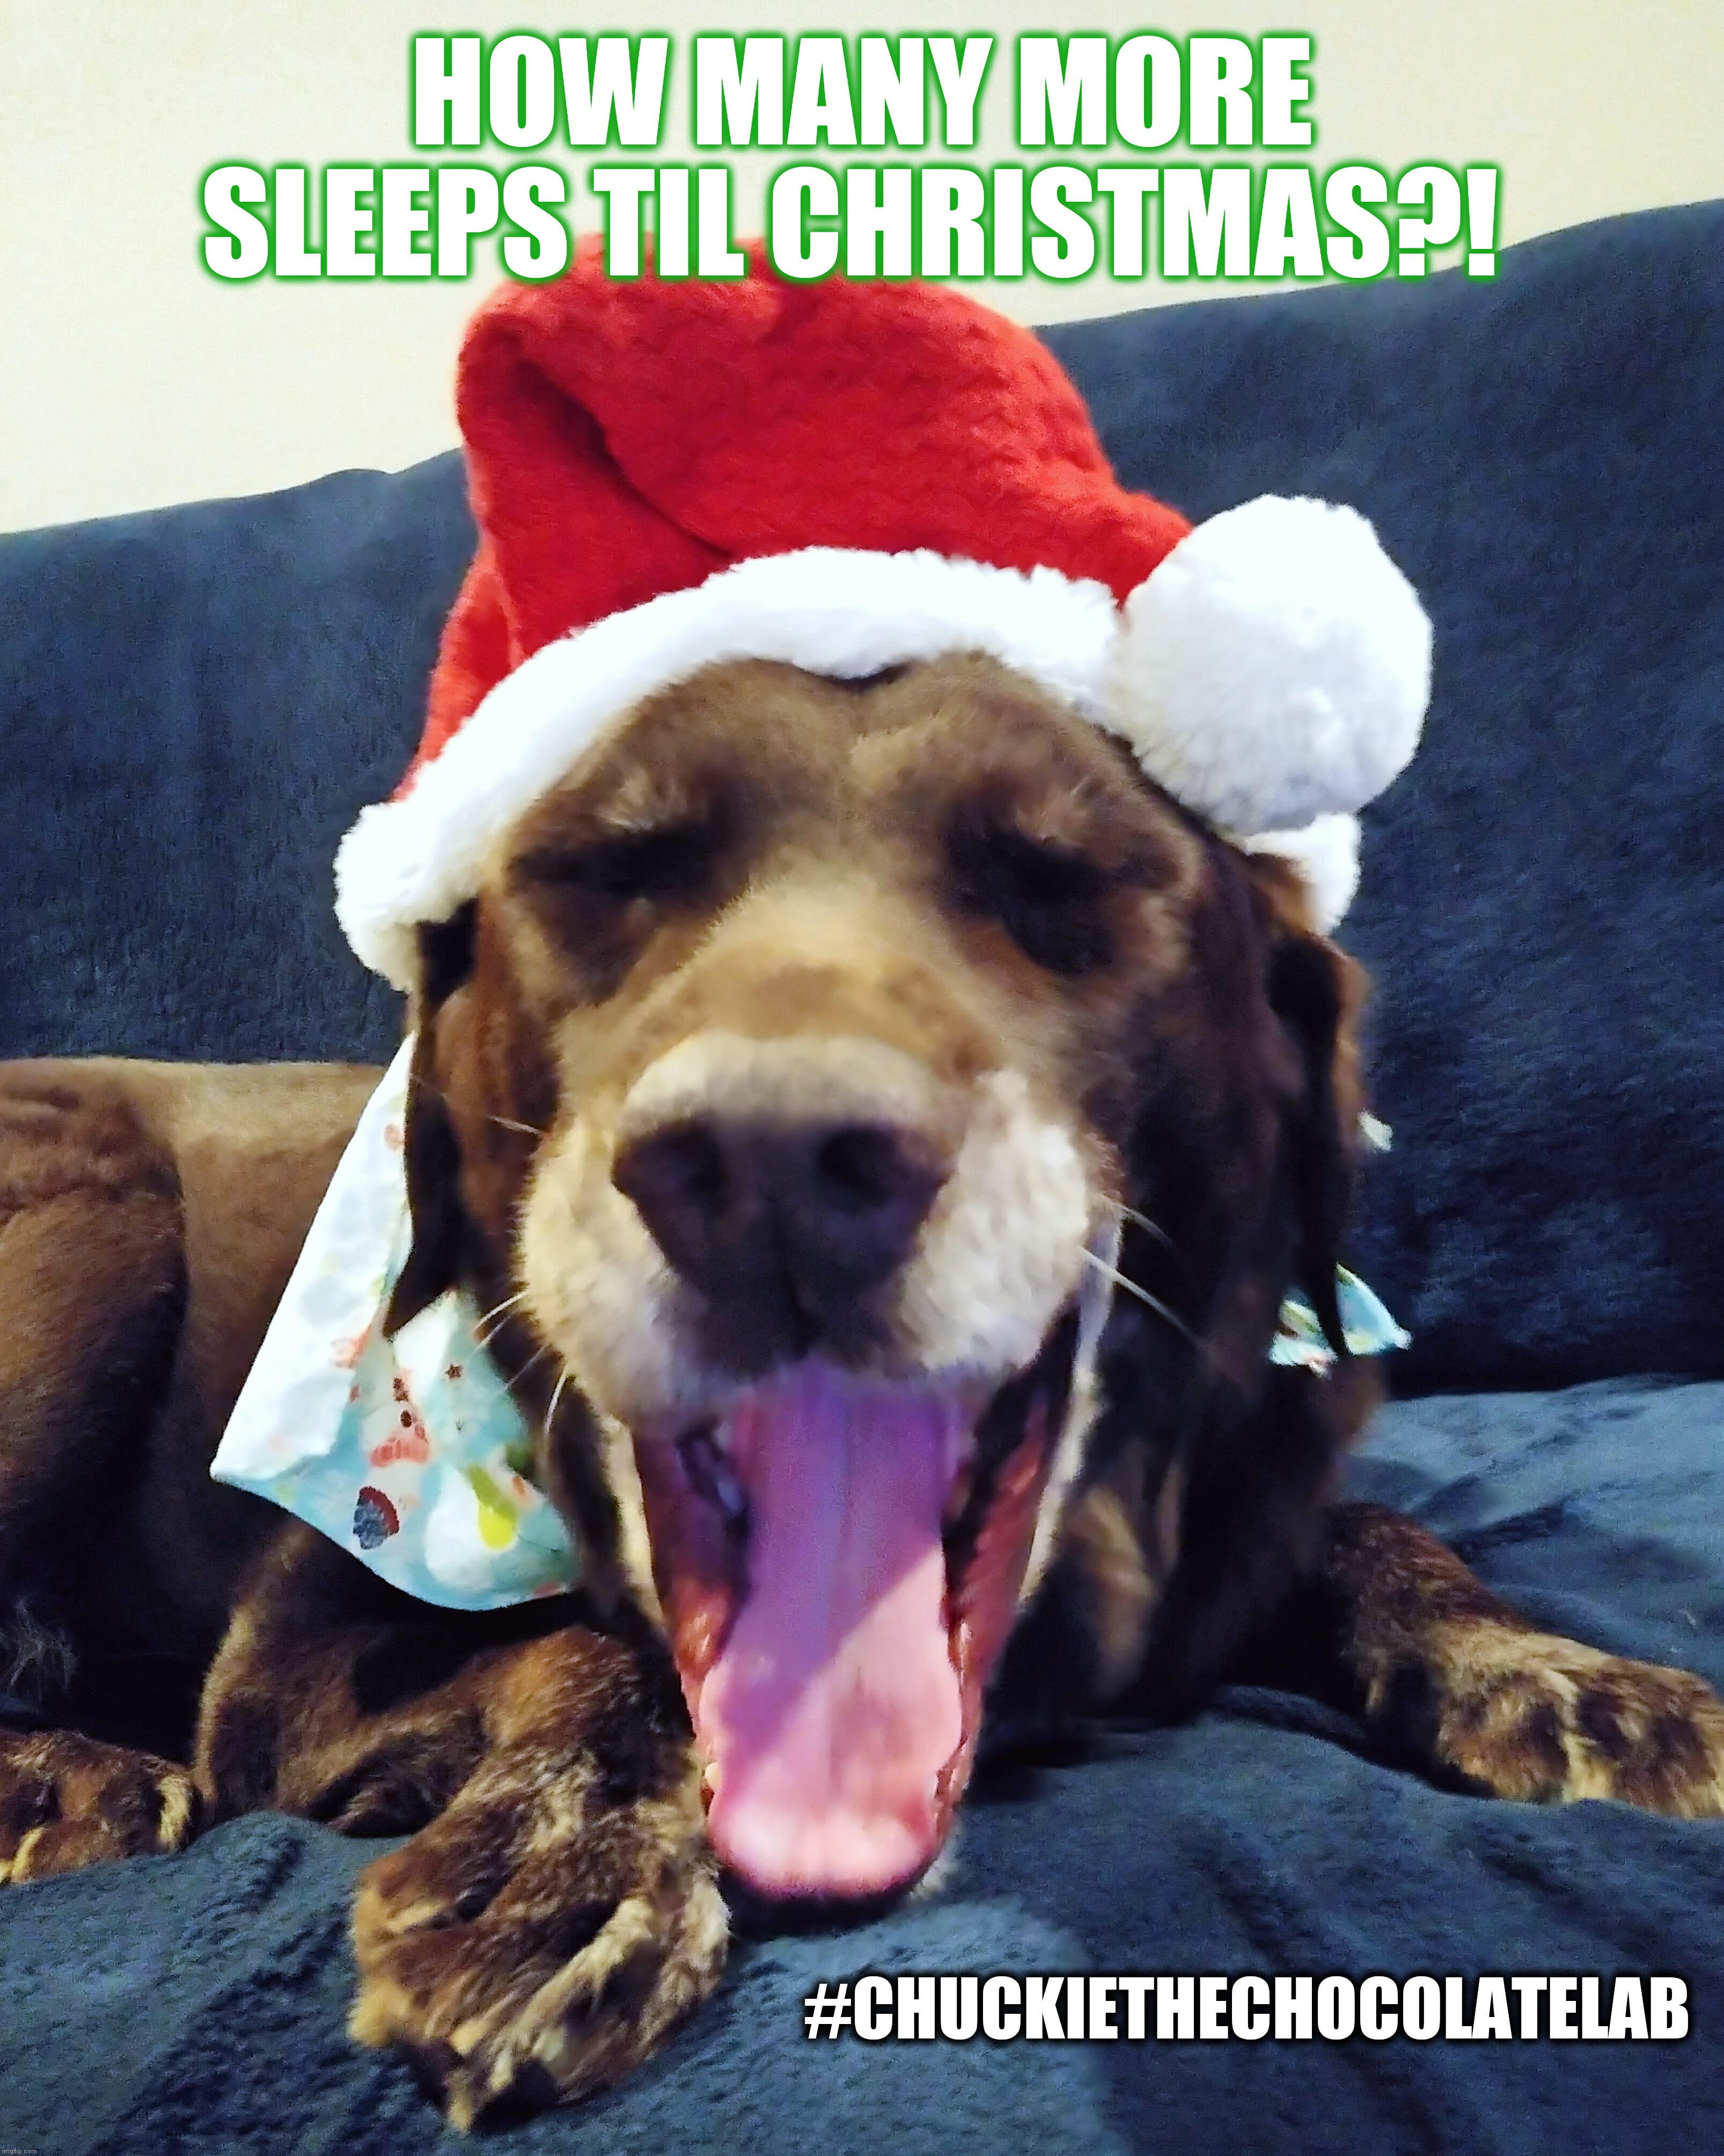 How many more sleeps til Christmas? | HOW MANY MORE SLEEPS TIL CHRISTMAS?! #CHUCKIETHECHOCOLATELAB | image tagged in chuckie the chocolate lab,dogs,memes,funny,christmas,sleepy | made w/ Imgflip meme maker